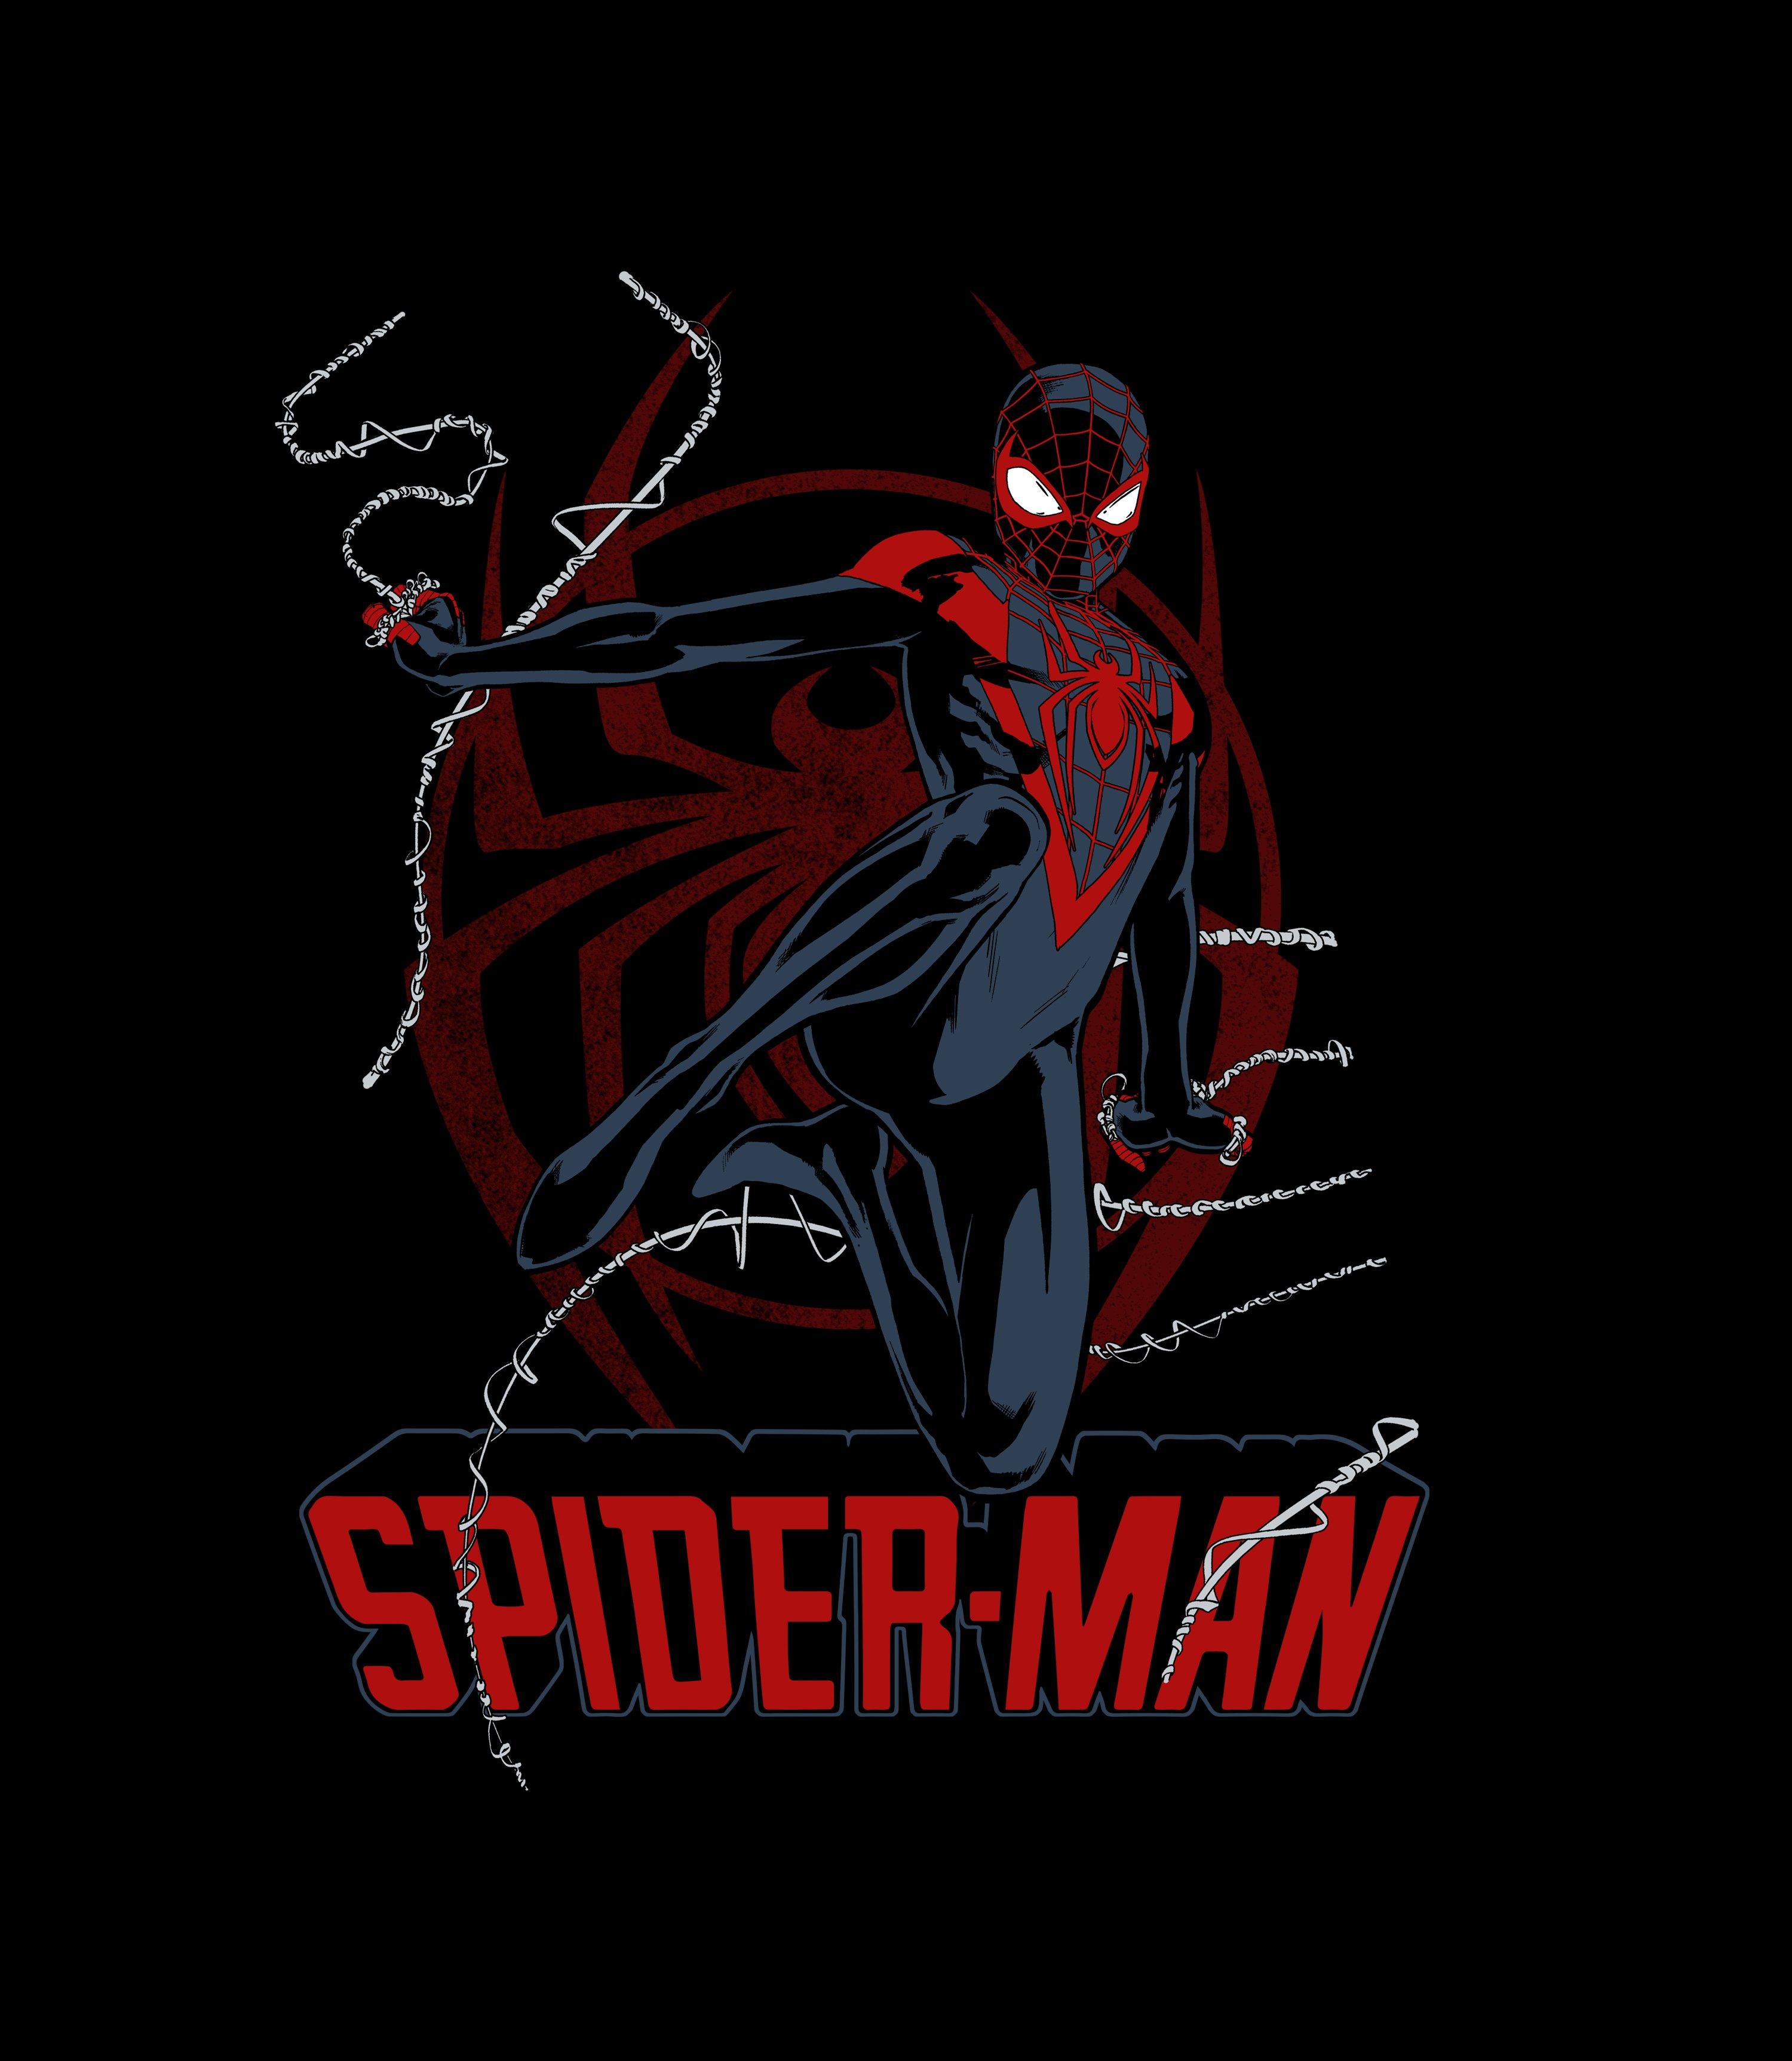 list item 2 of 2 Spider-Man Miles Morales Comic Cover T-Shirt